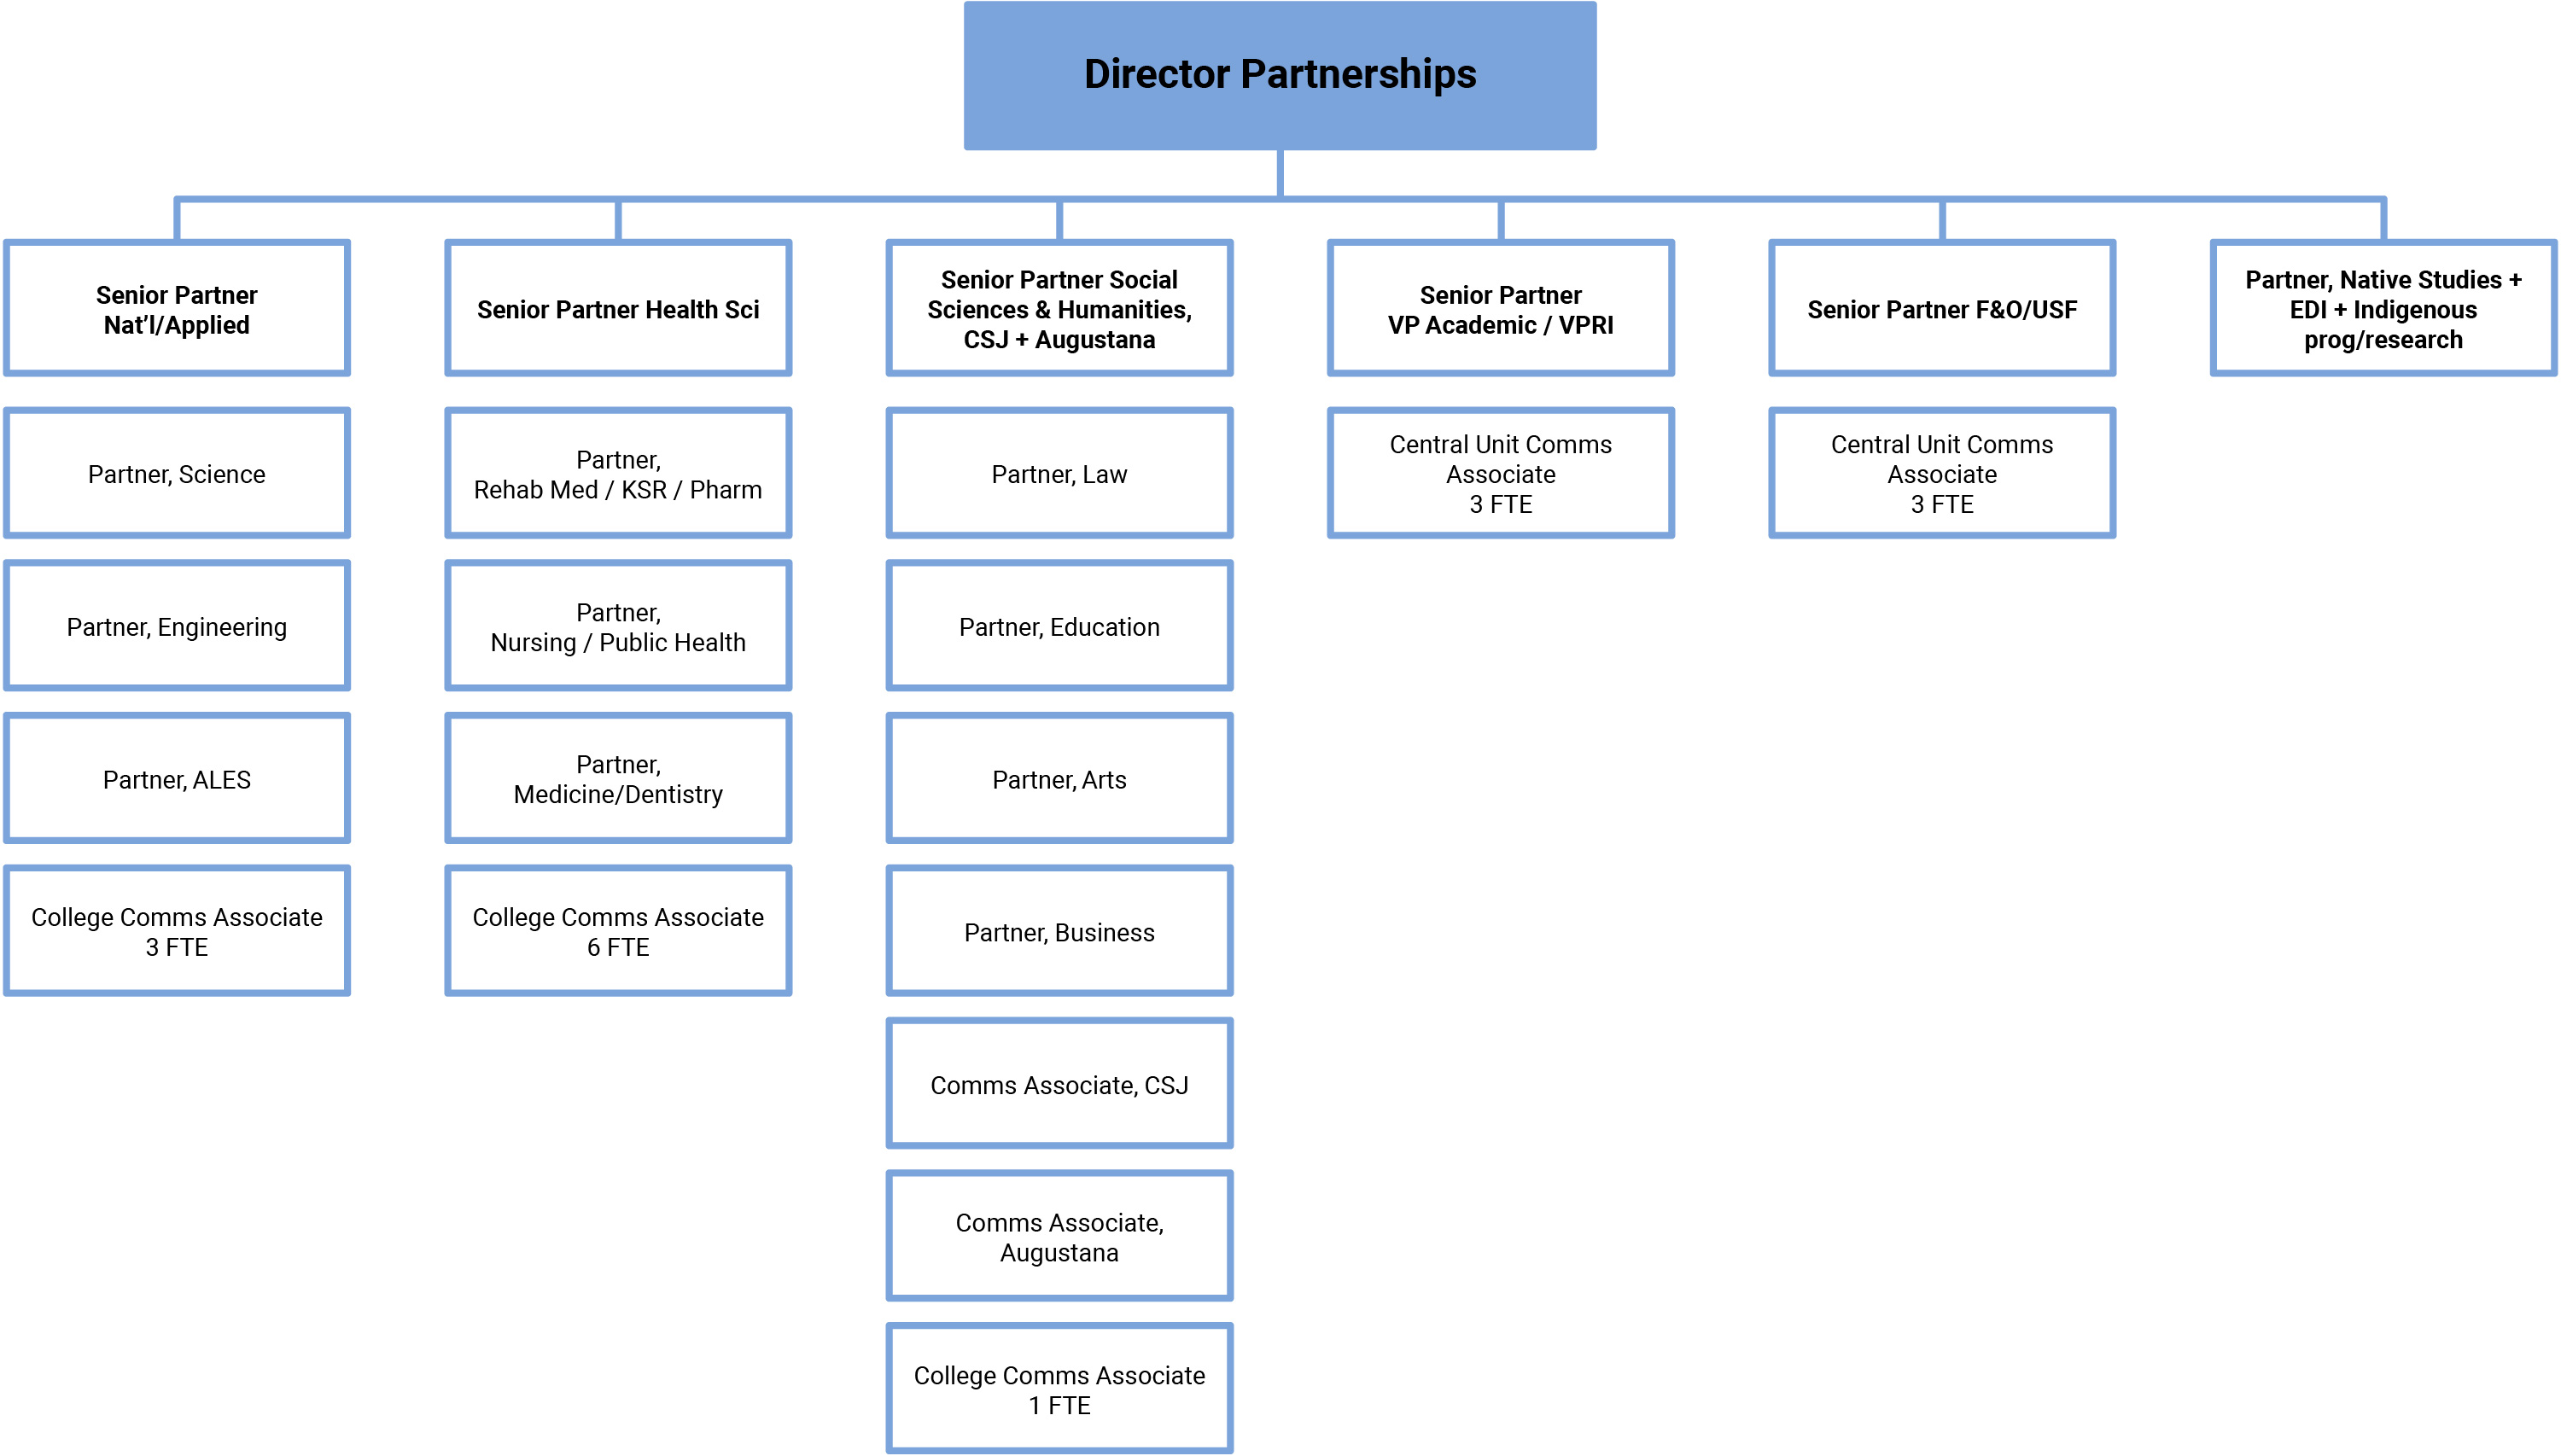 Structure for the External Relations partnership structure